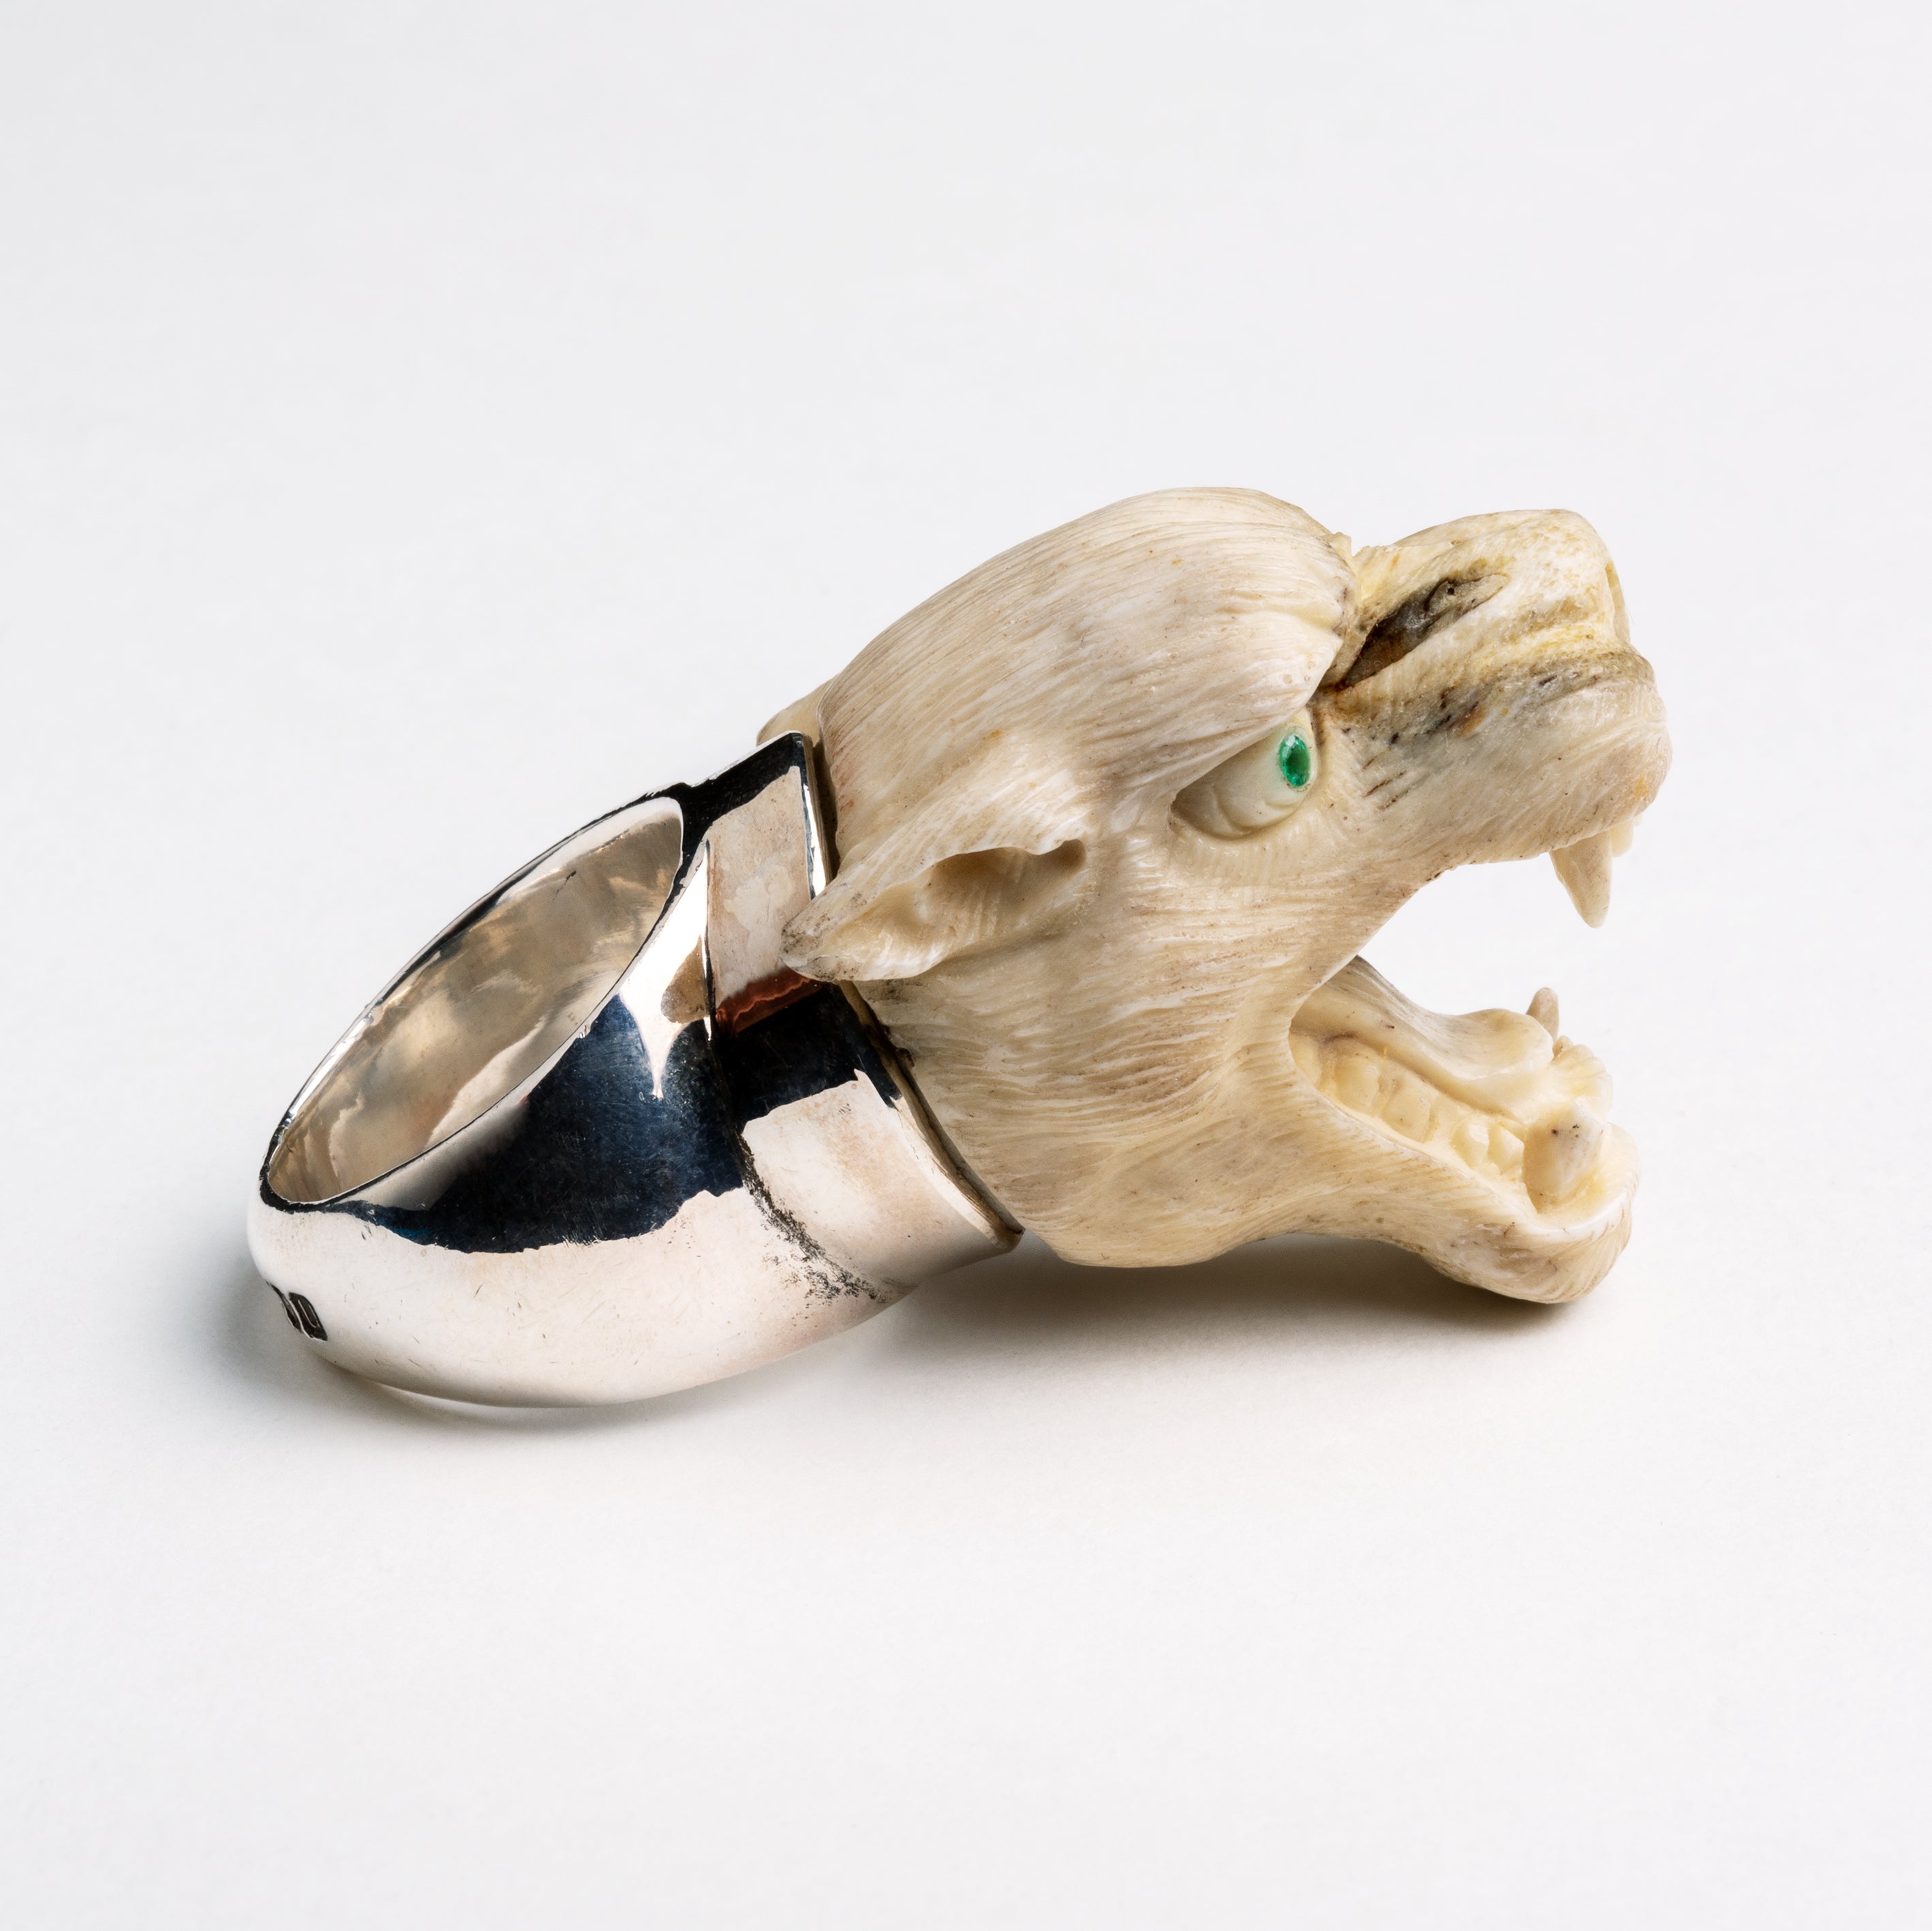 Carved tiger head silver ring